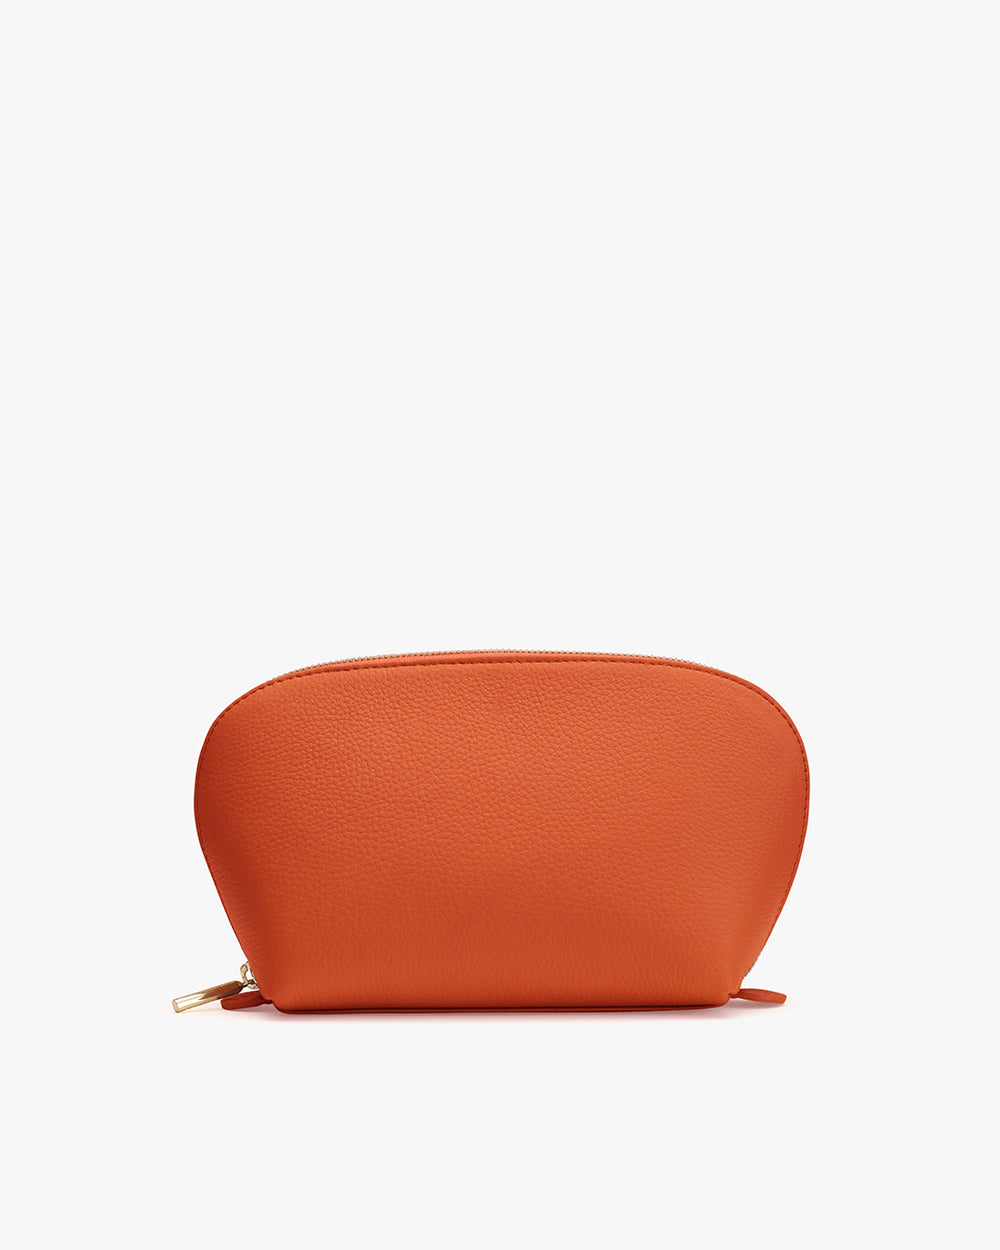 Small zipped pouch on a plain background.